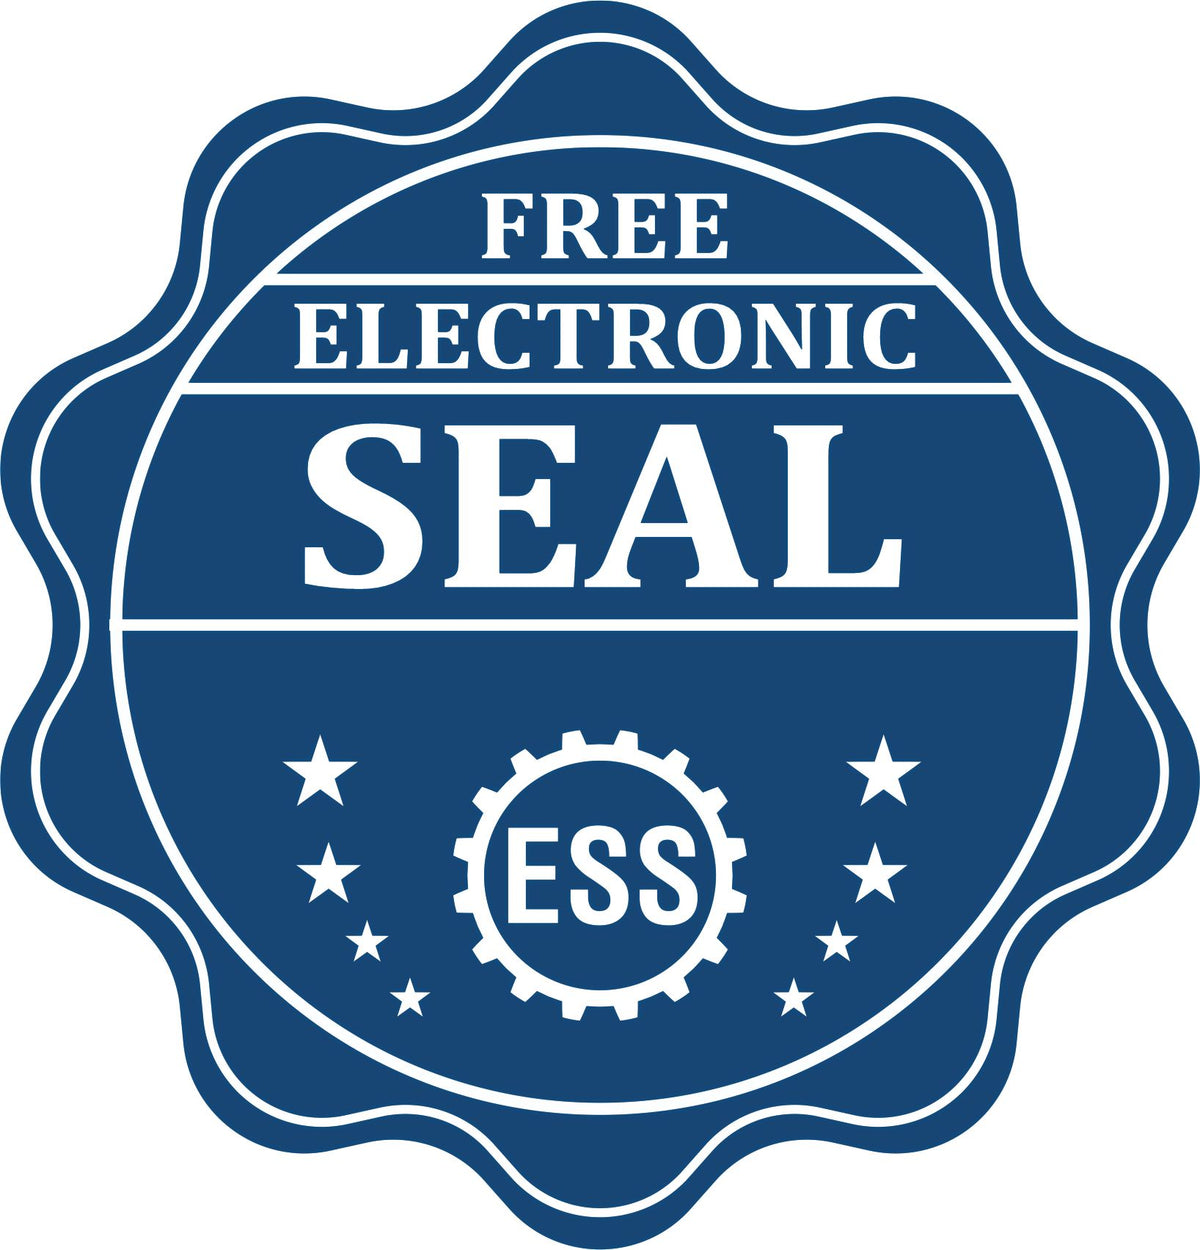 A badge showing a free electronic seal for the Slim Pre-Inked Mississippi Land Surveyor Seal Stamp with stars and the ESS gear on the emblem.